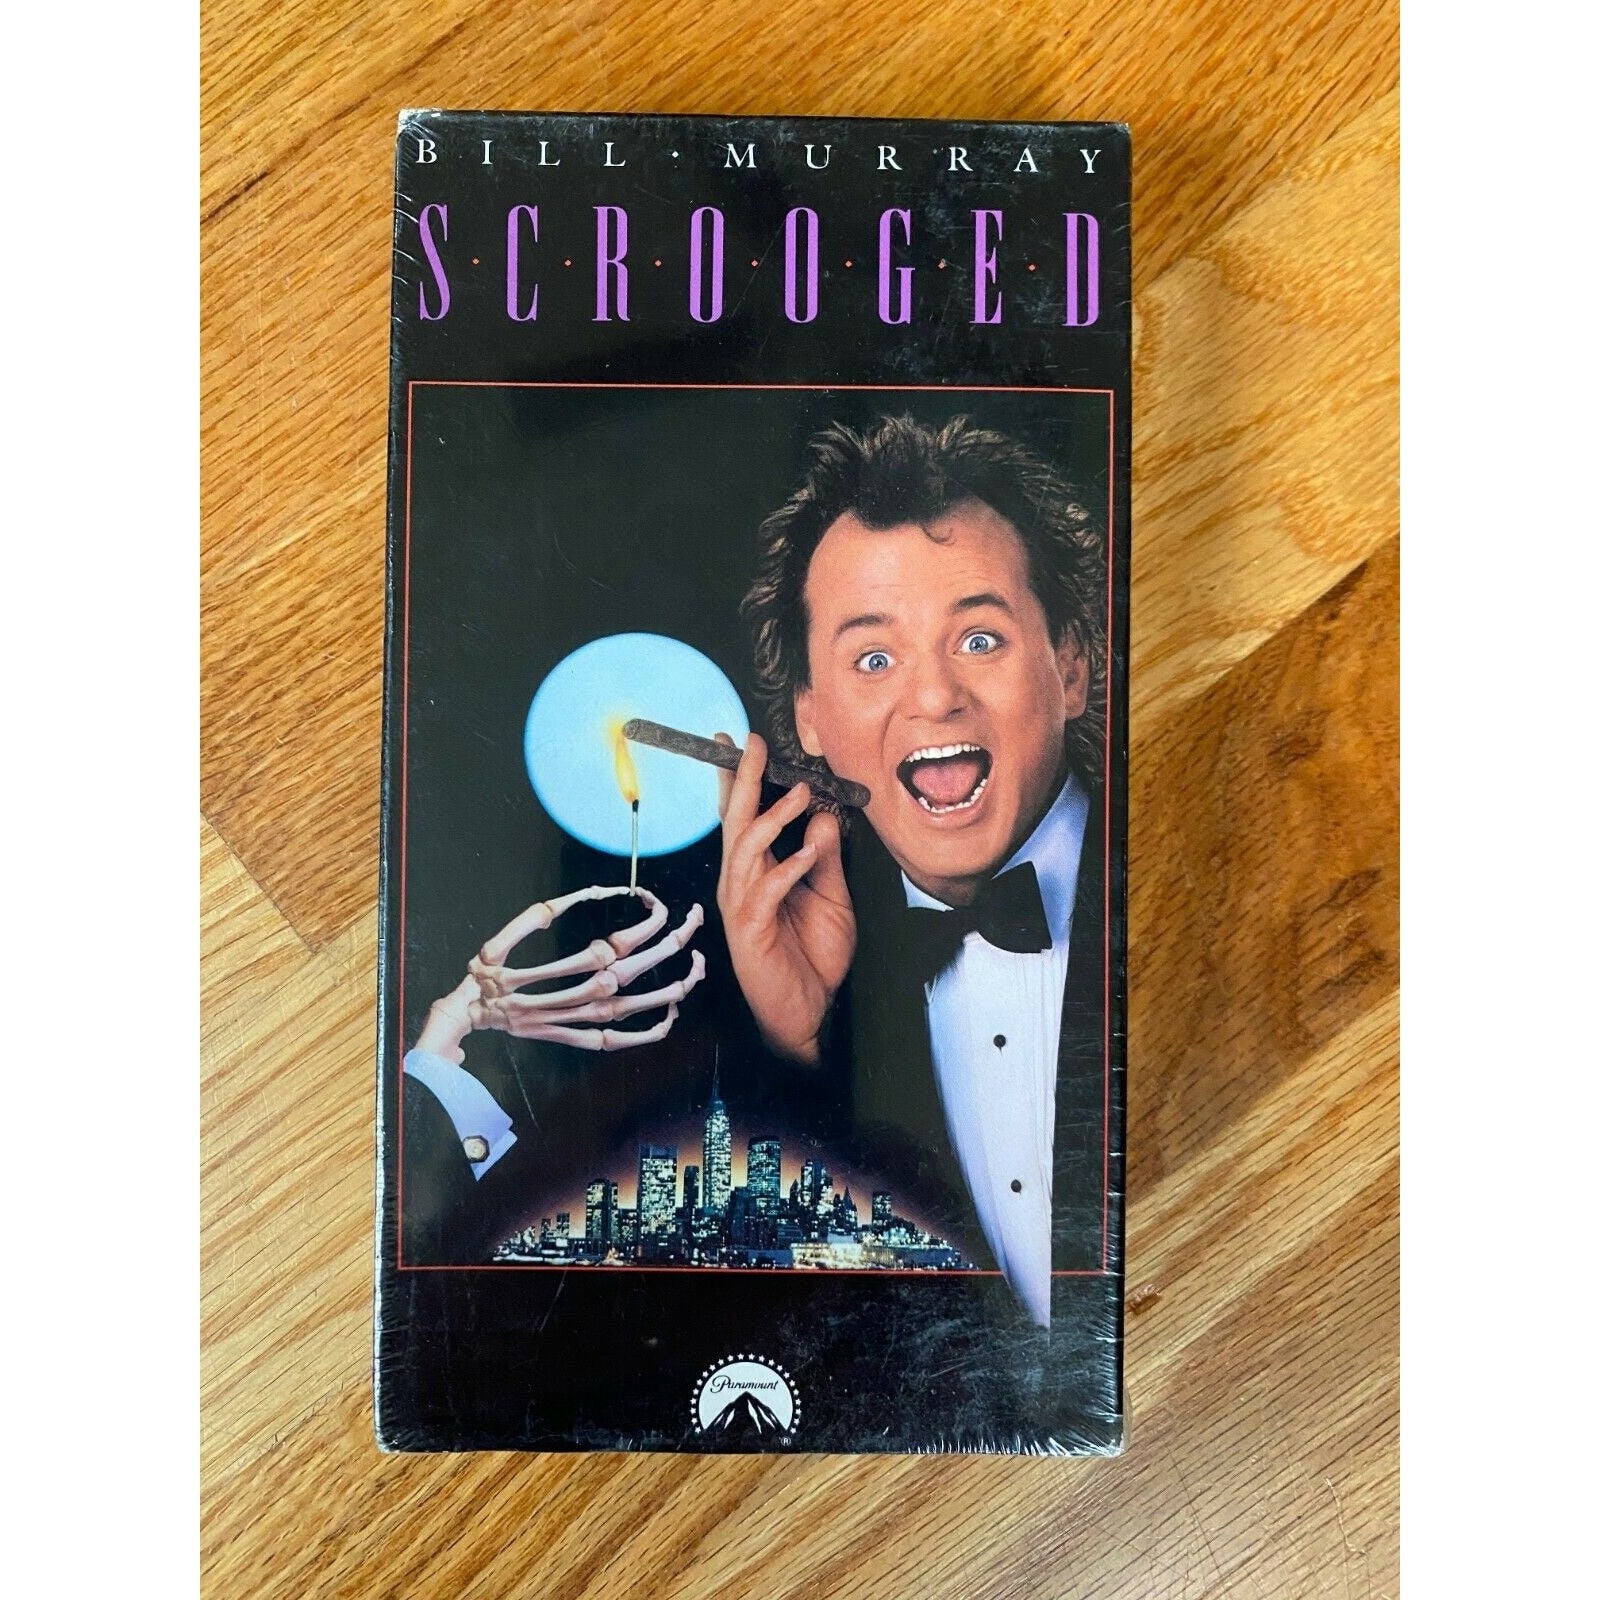 SCROOGED VHS - Bill Murray - New